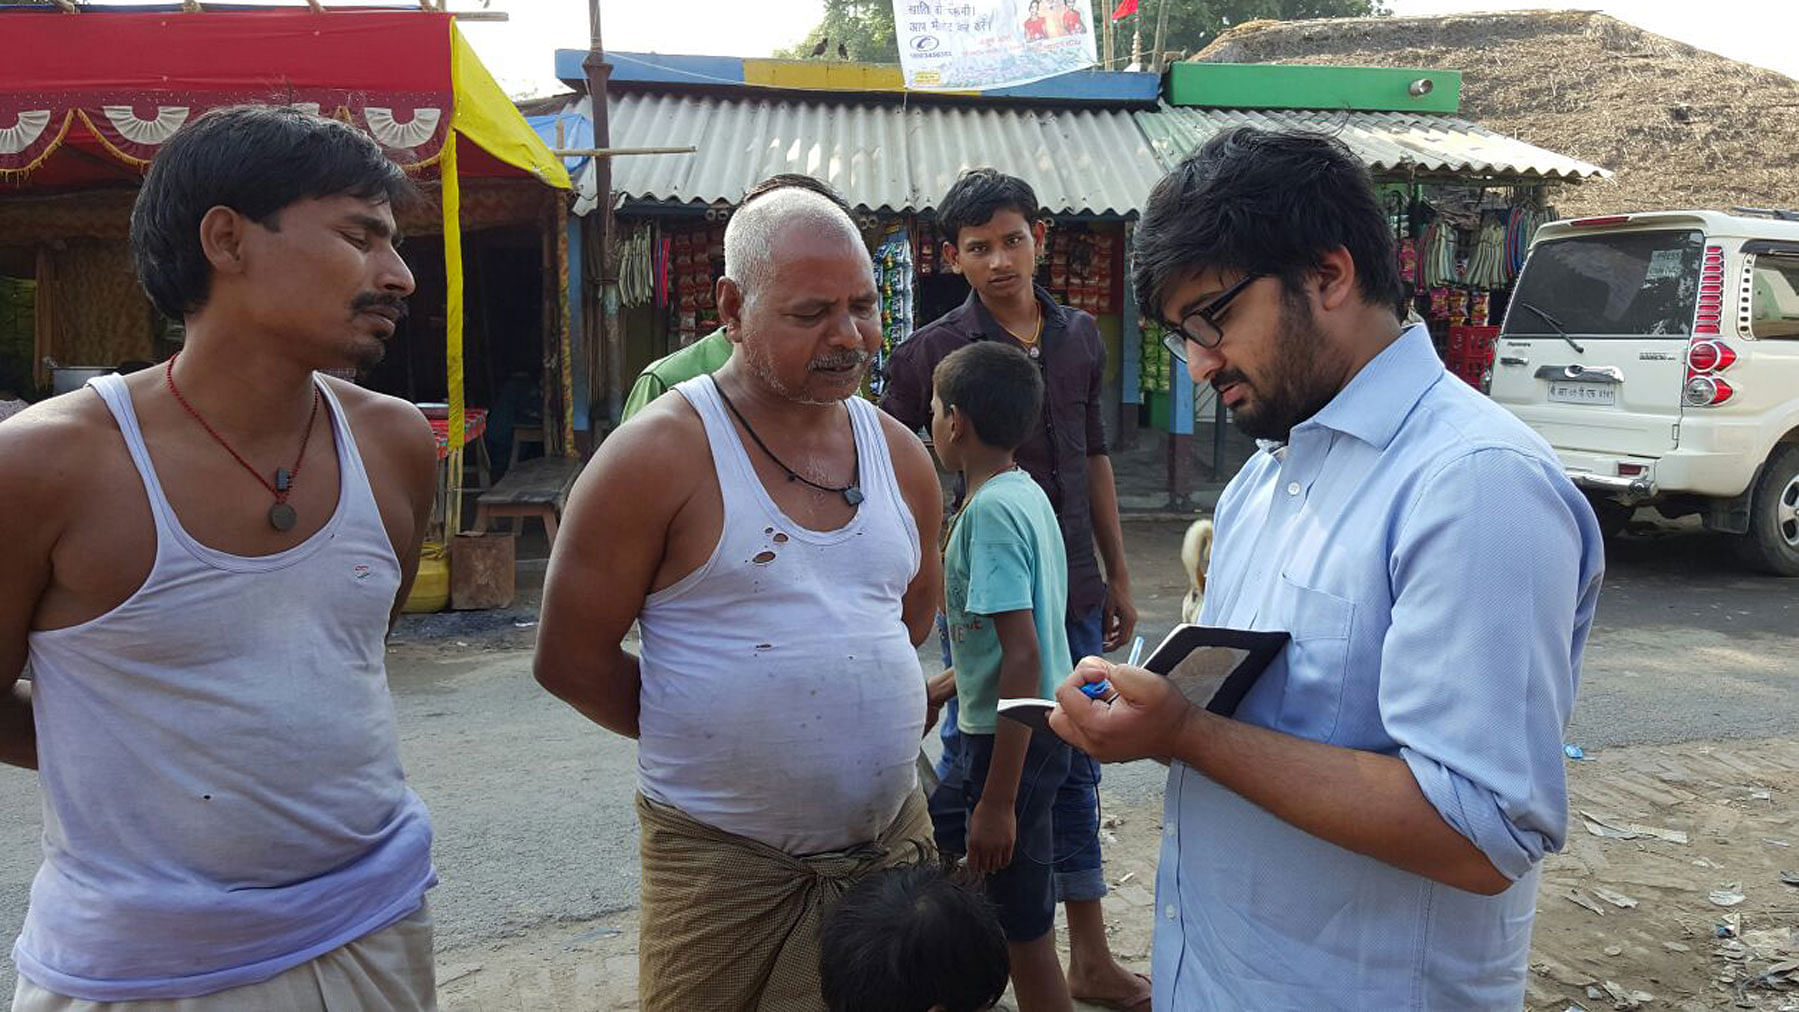 The Quint’s Aakash Joshi talking to Dhirendra Pathak and Bhola Poddar in Kadwa block. (Photo: The Quint)